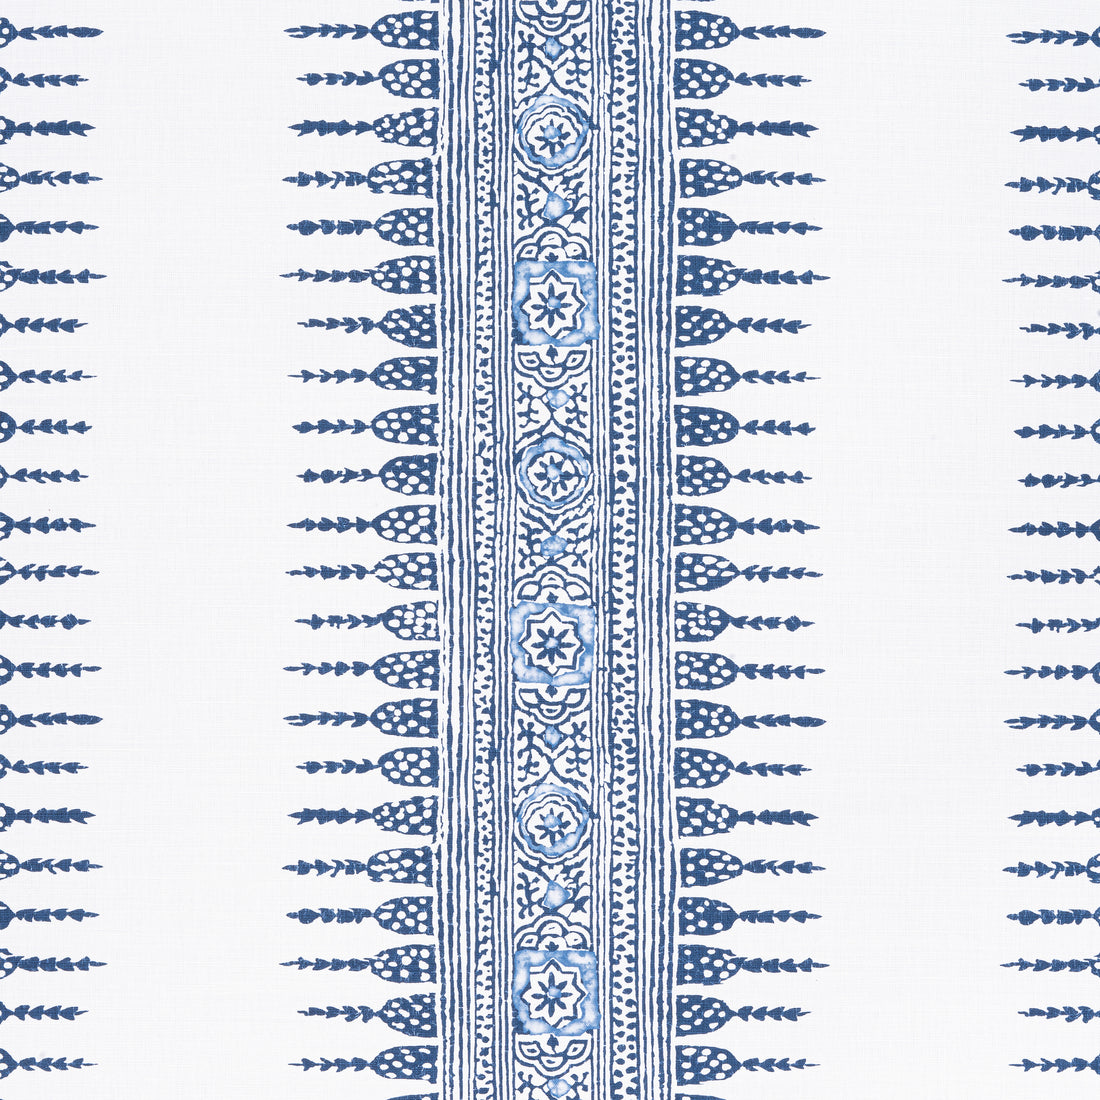 Javanese Stripe fabric in navy and white color - pattern number AF15137 - by Anna French in the Antilles collection